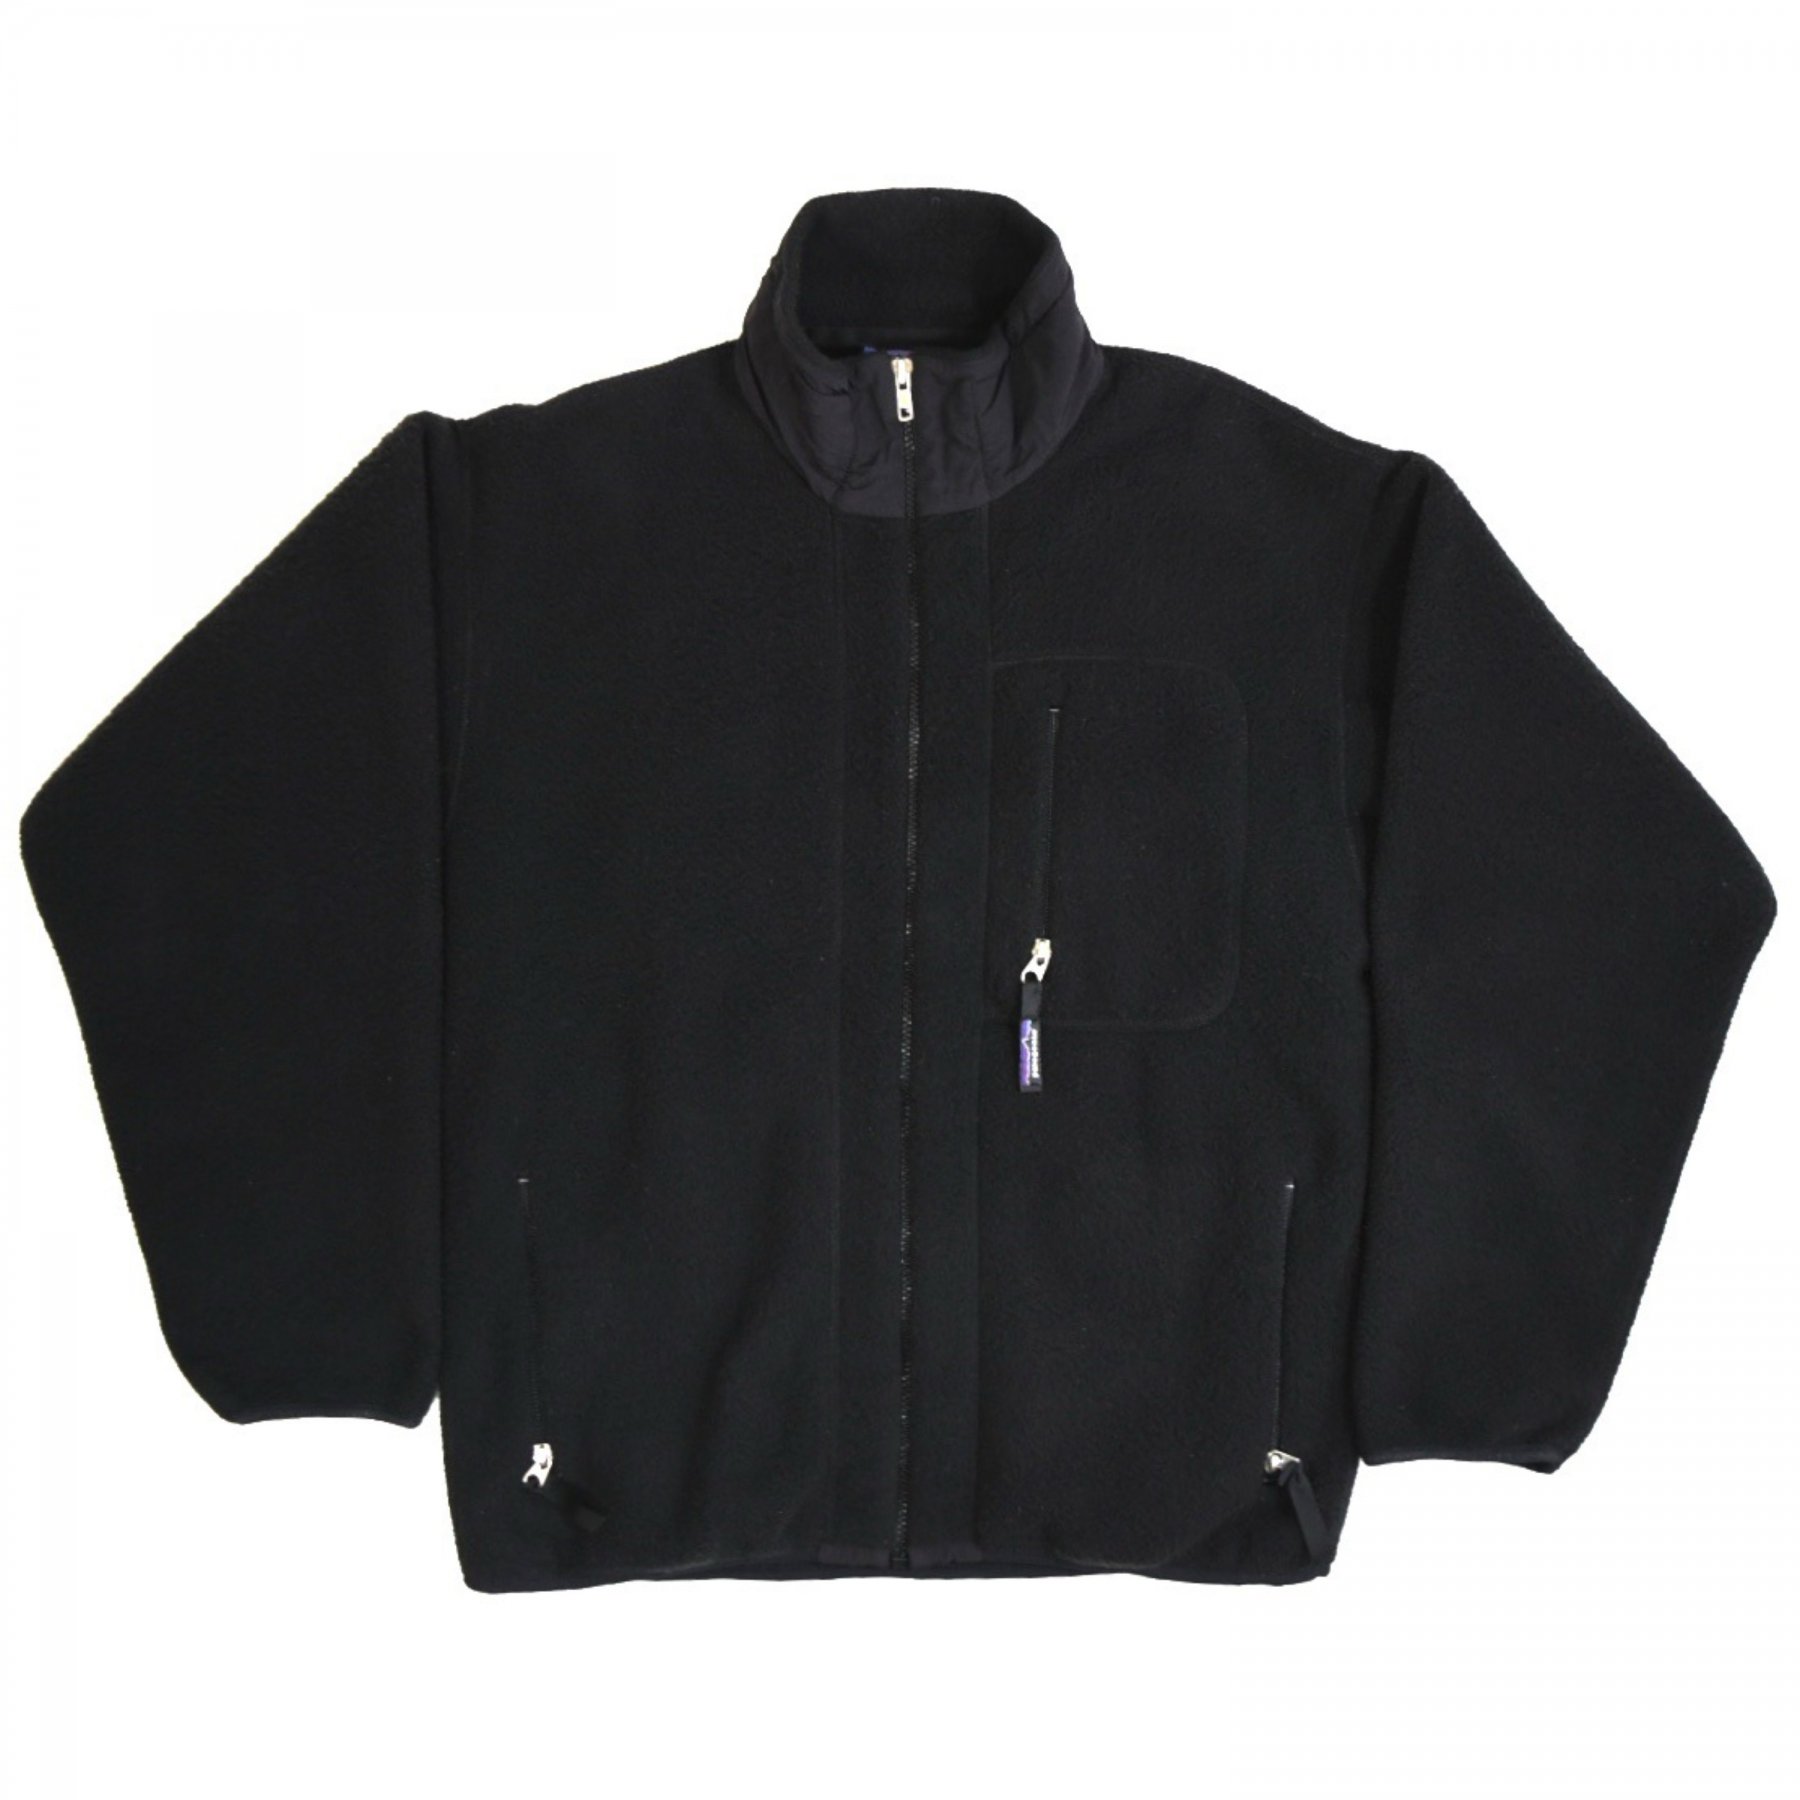 OUTER/アウター - MISSION WEB STORE